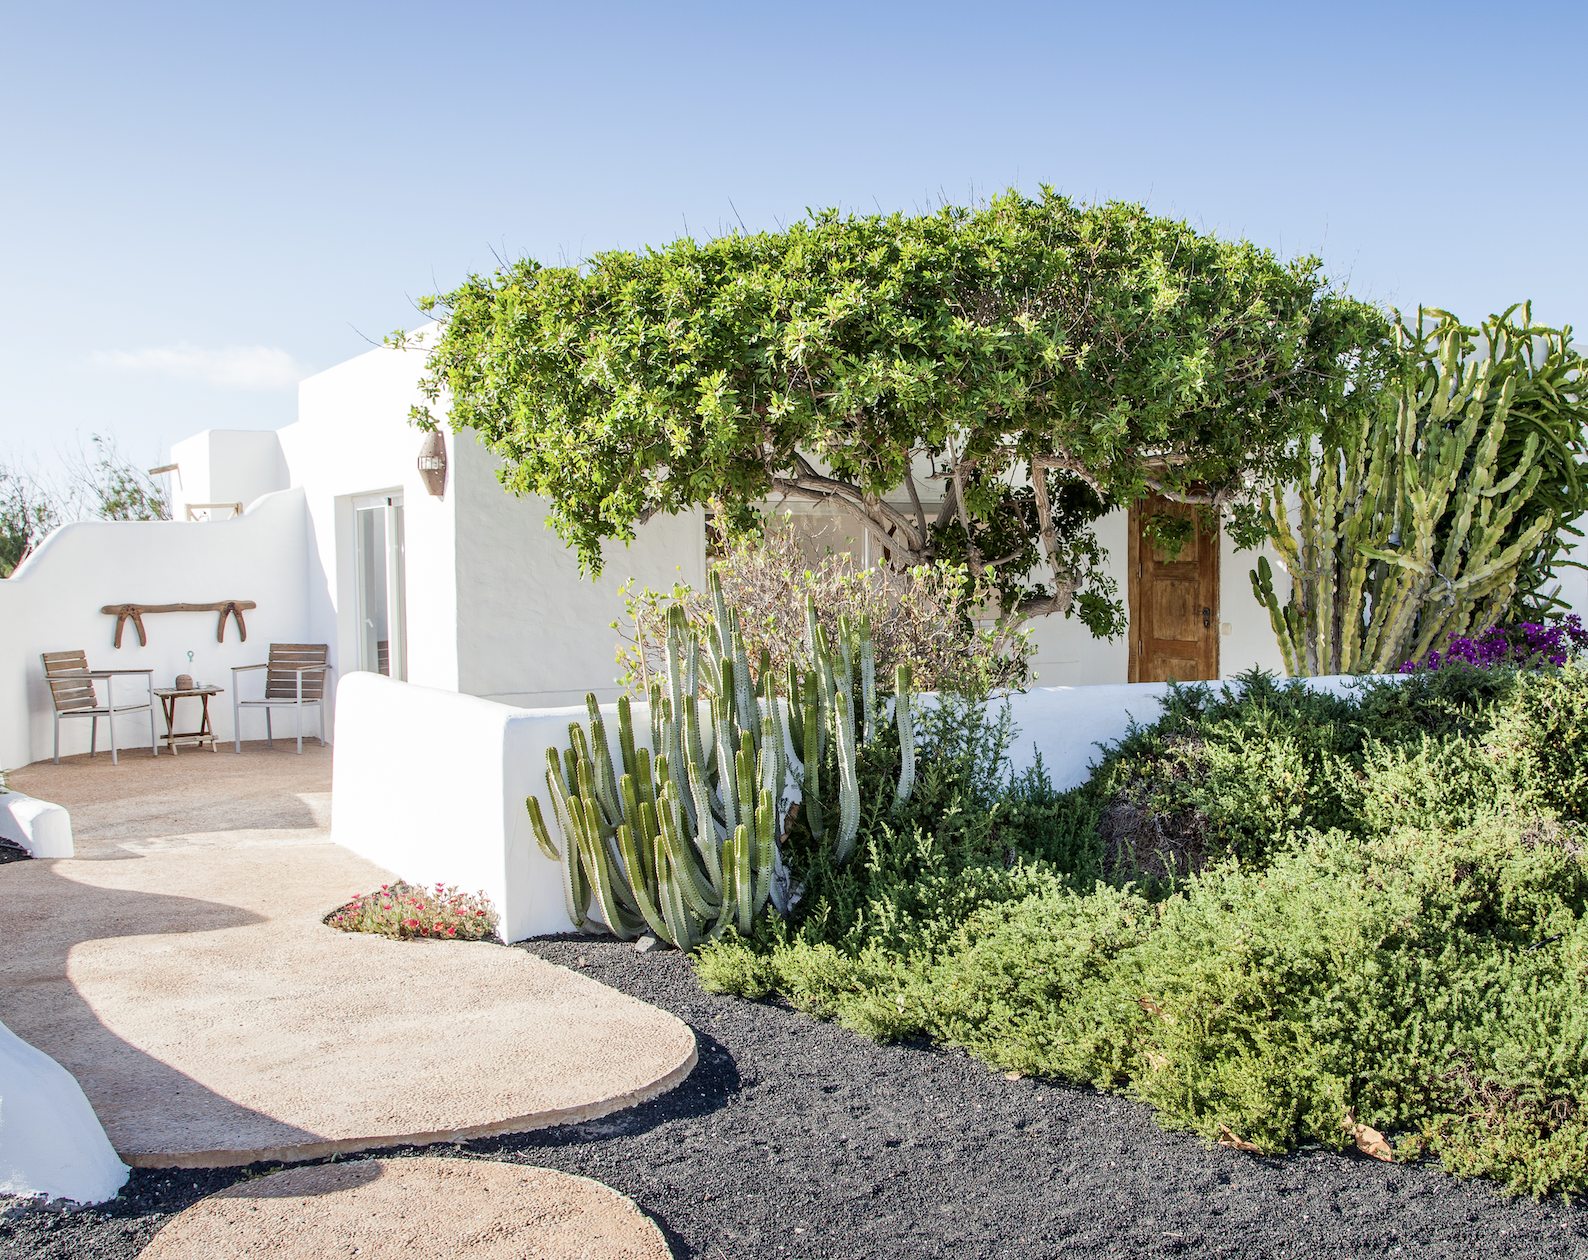 Earth Suite, Terrace and garden on the volcano